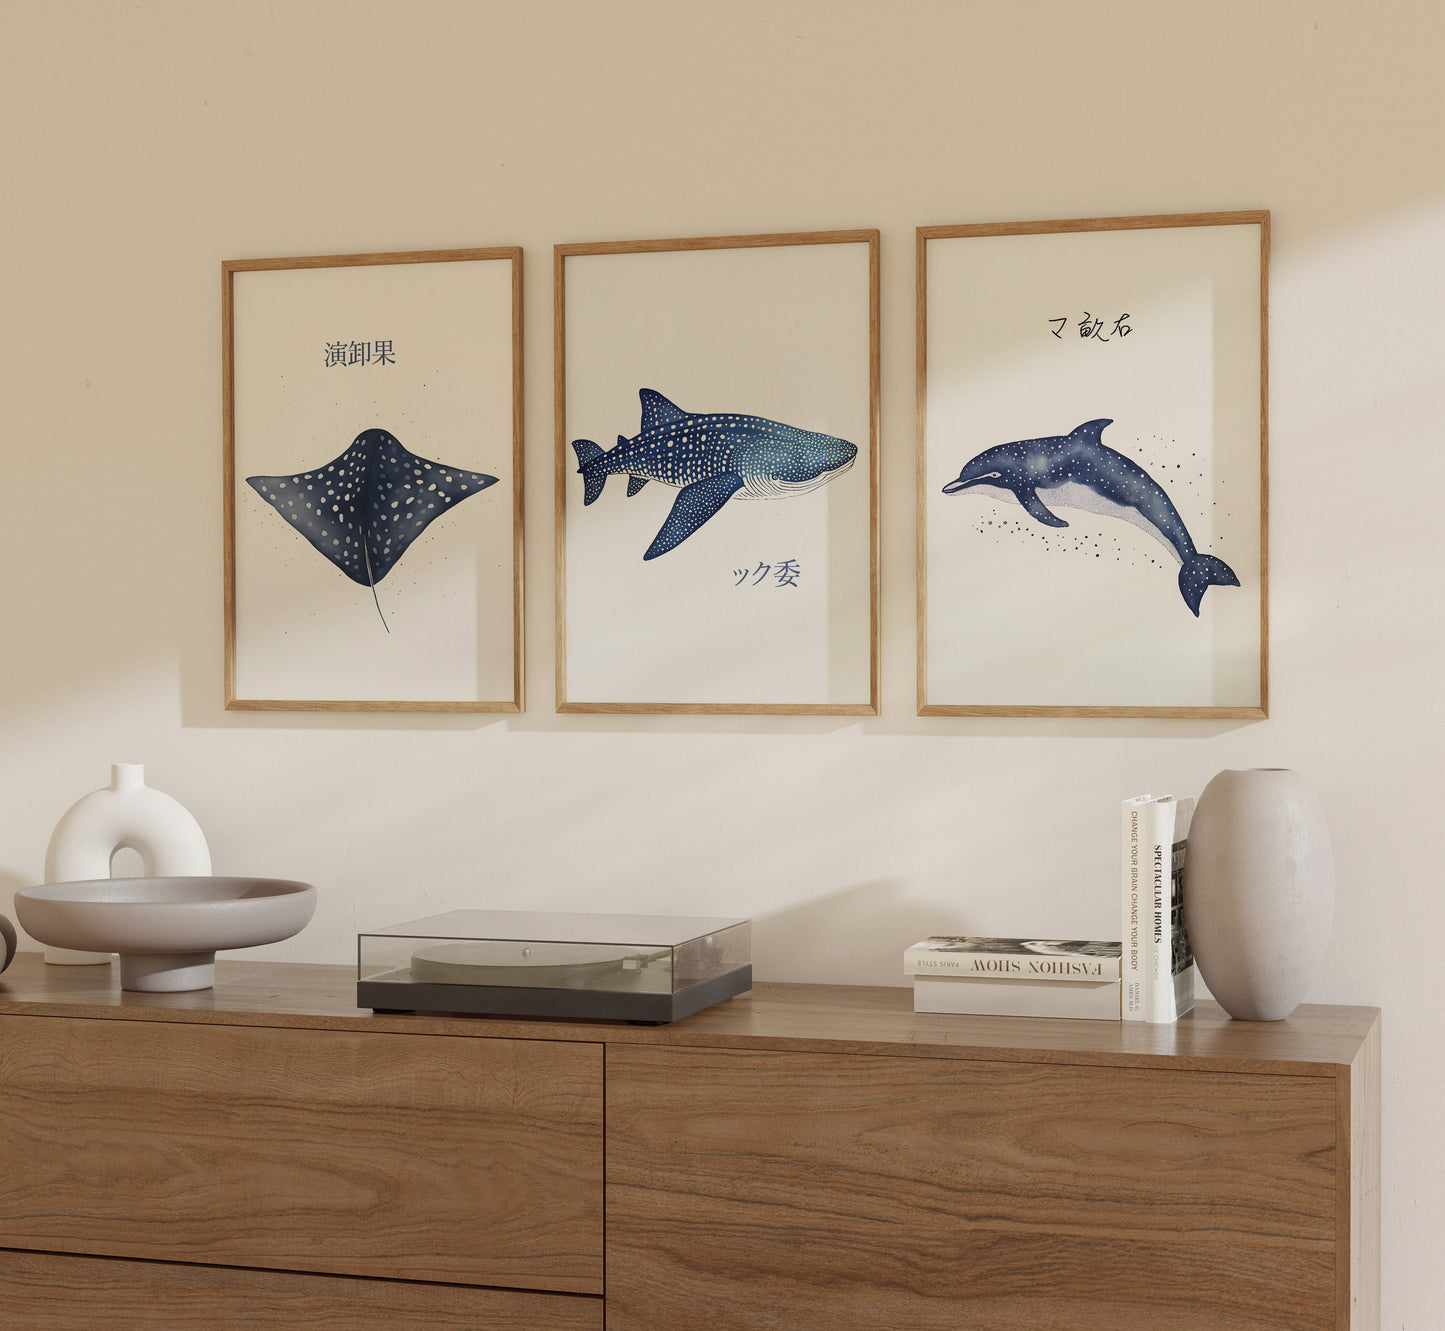 Three framed illustrations of marine animals on a wall above a wooden sideboard.